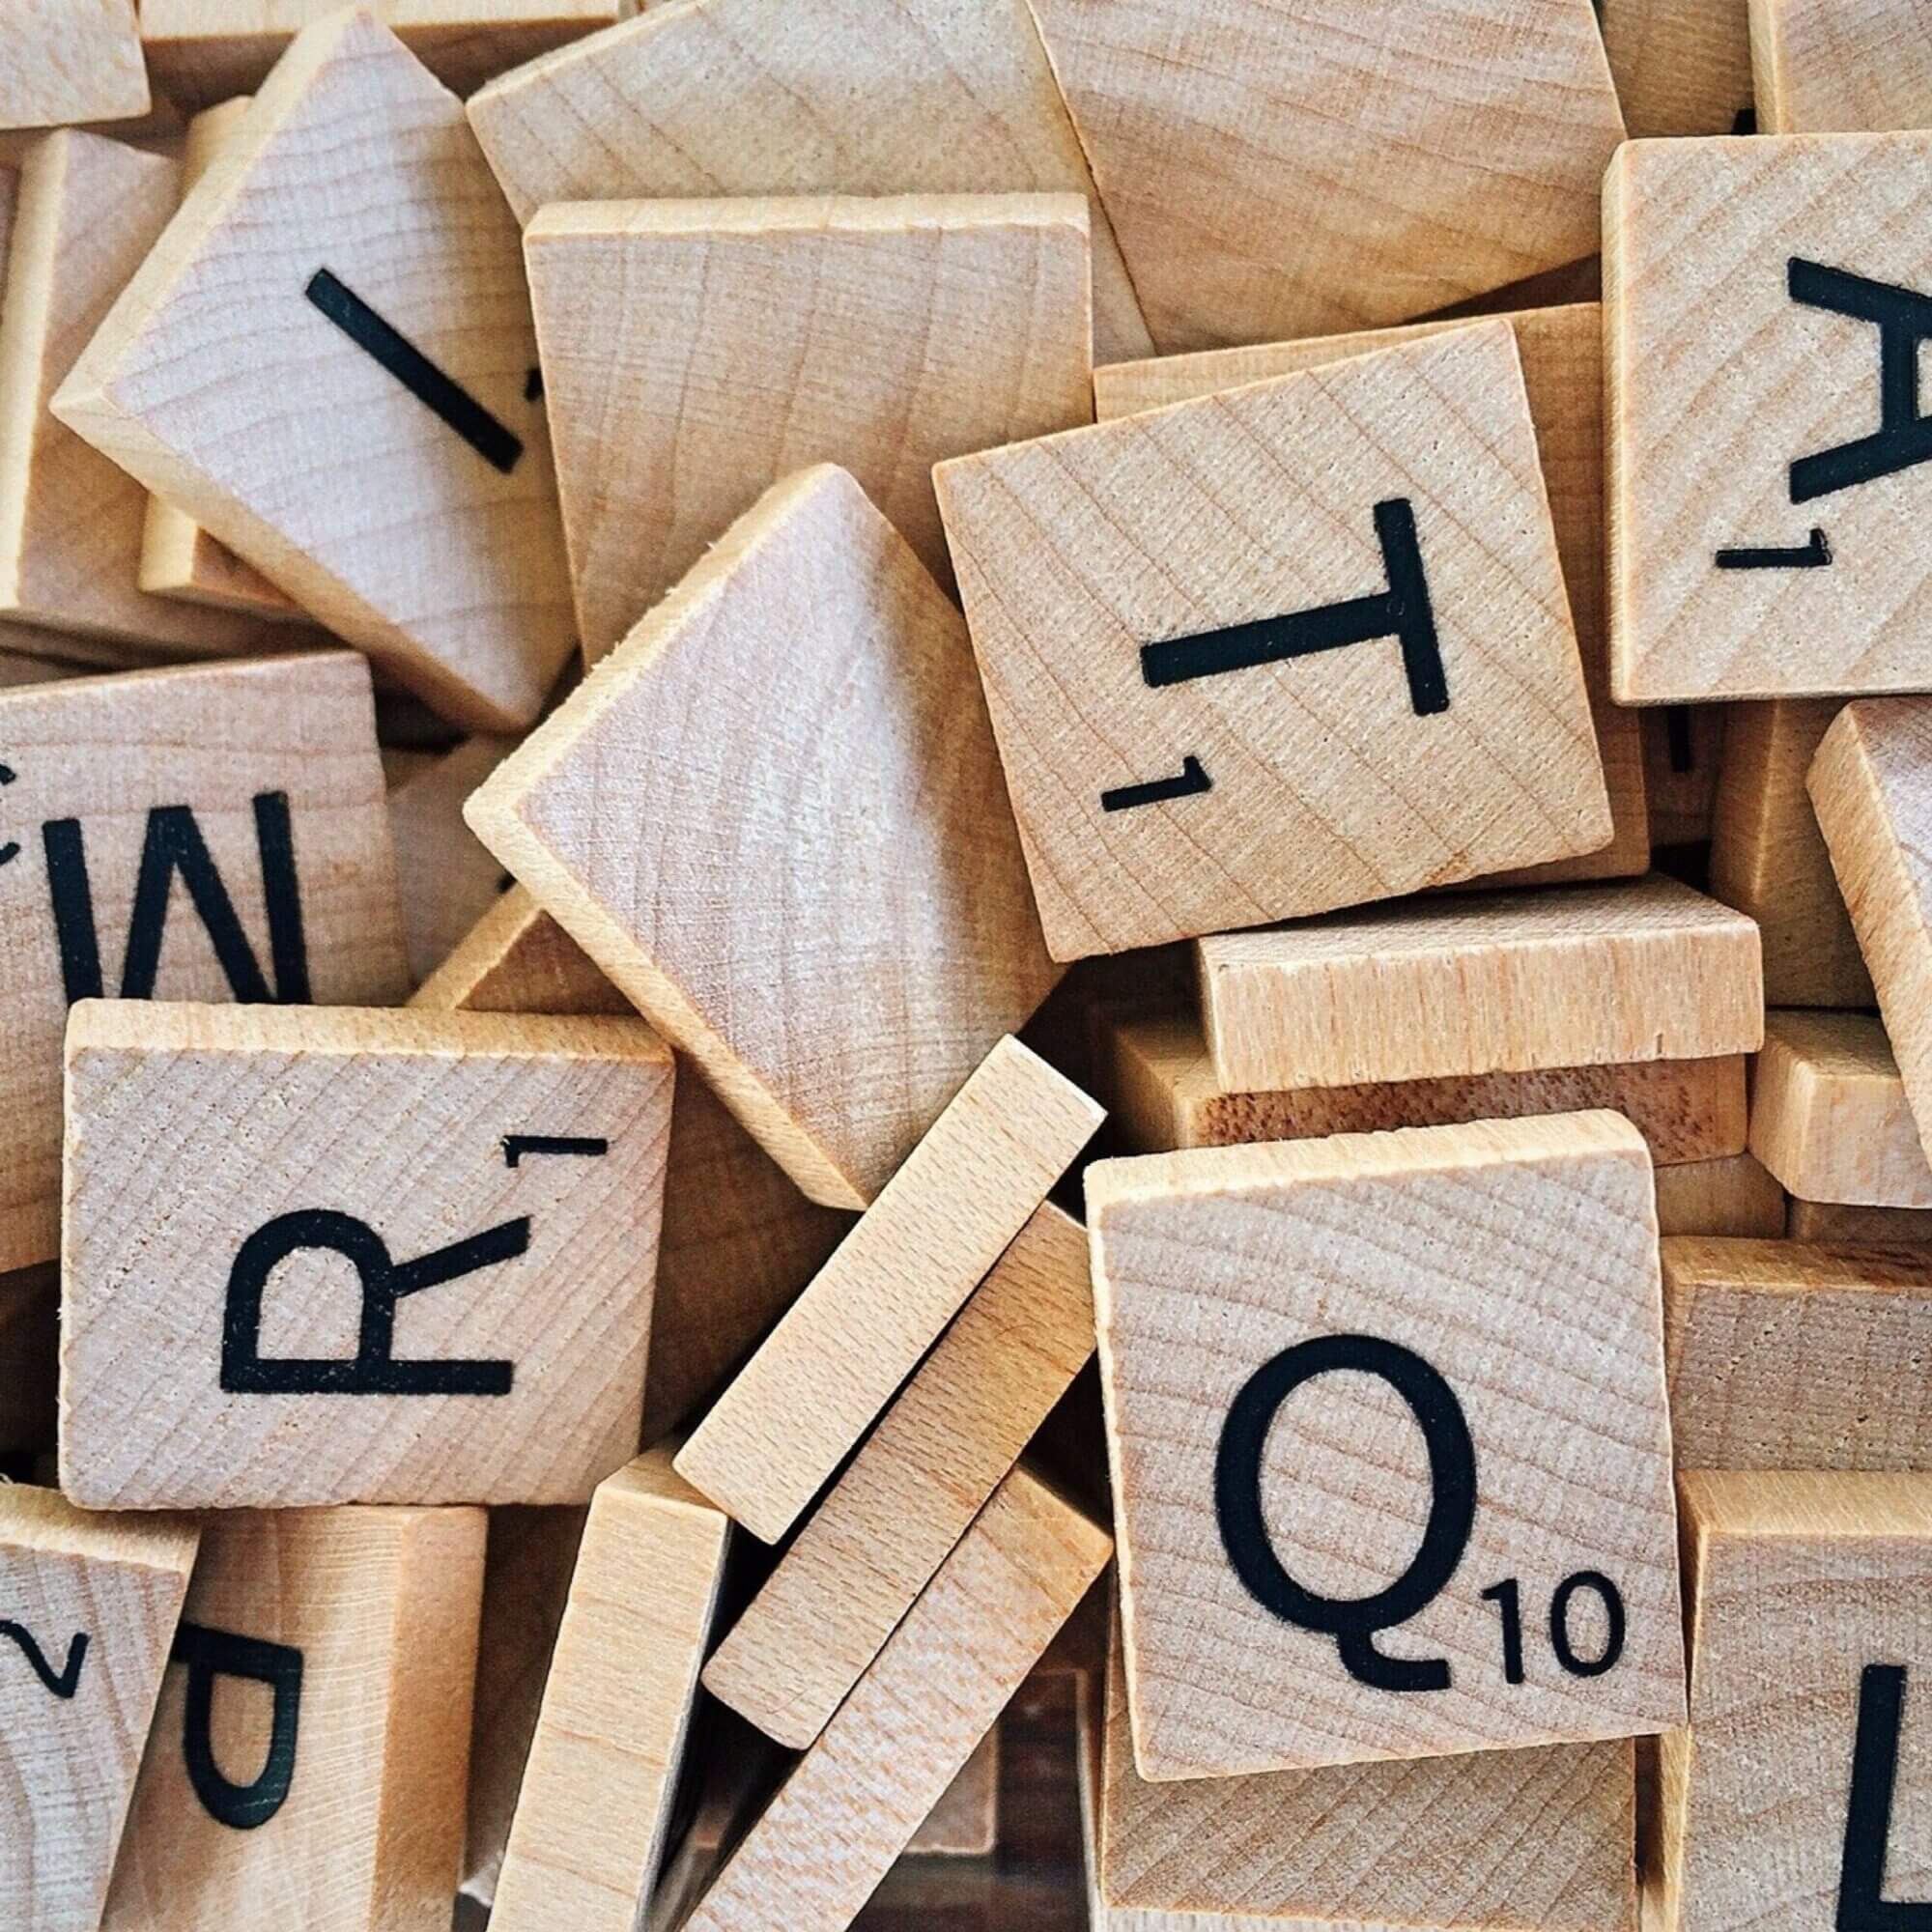 A pile of wooden scrabble letters on a table.